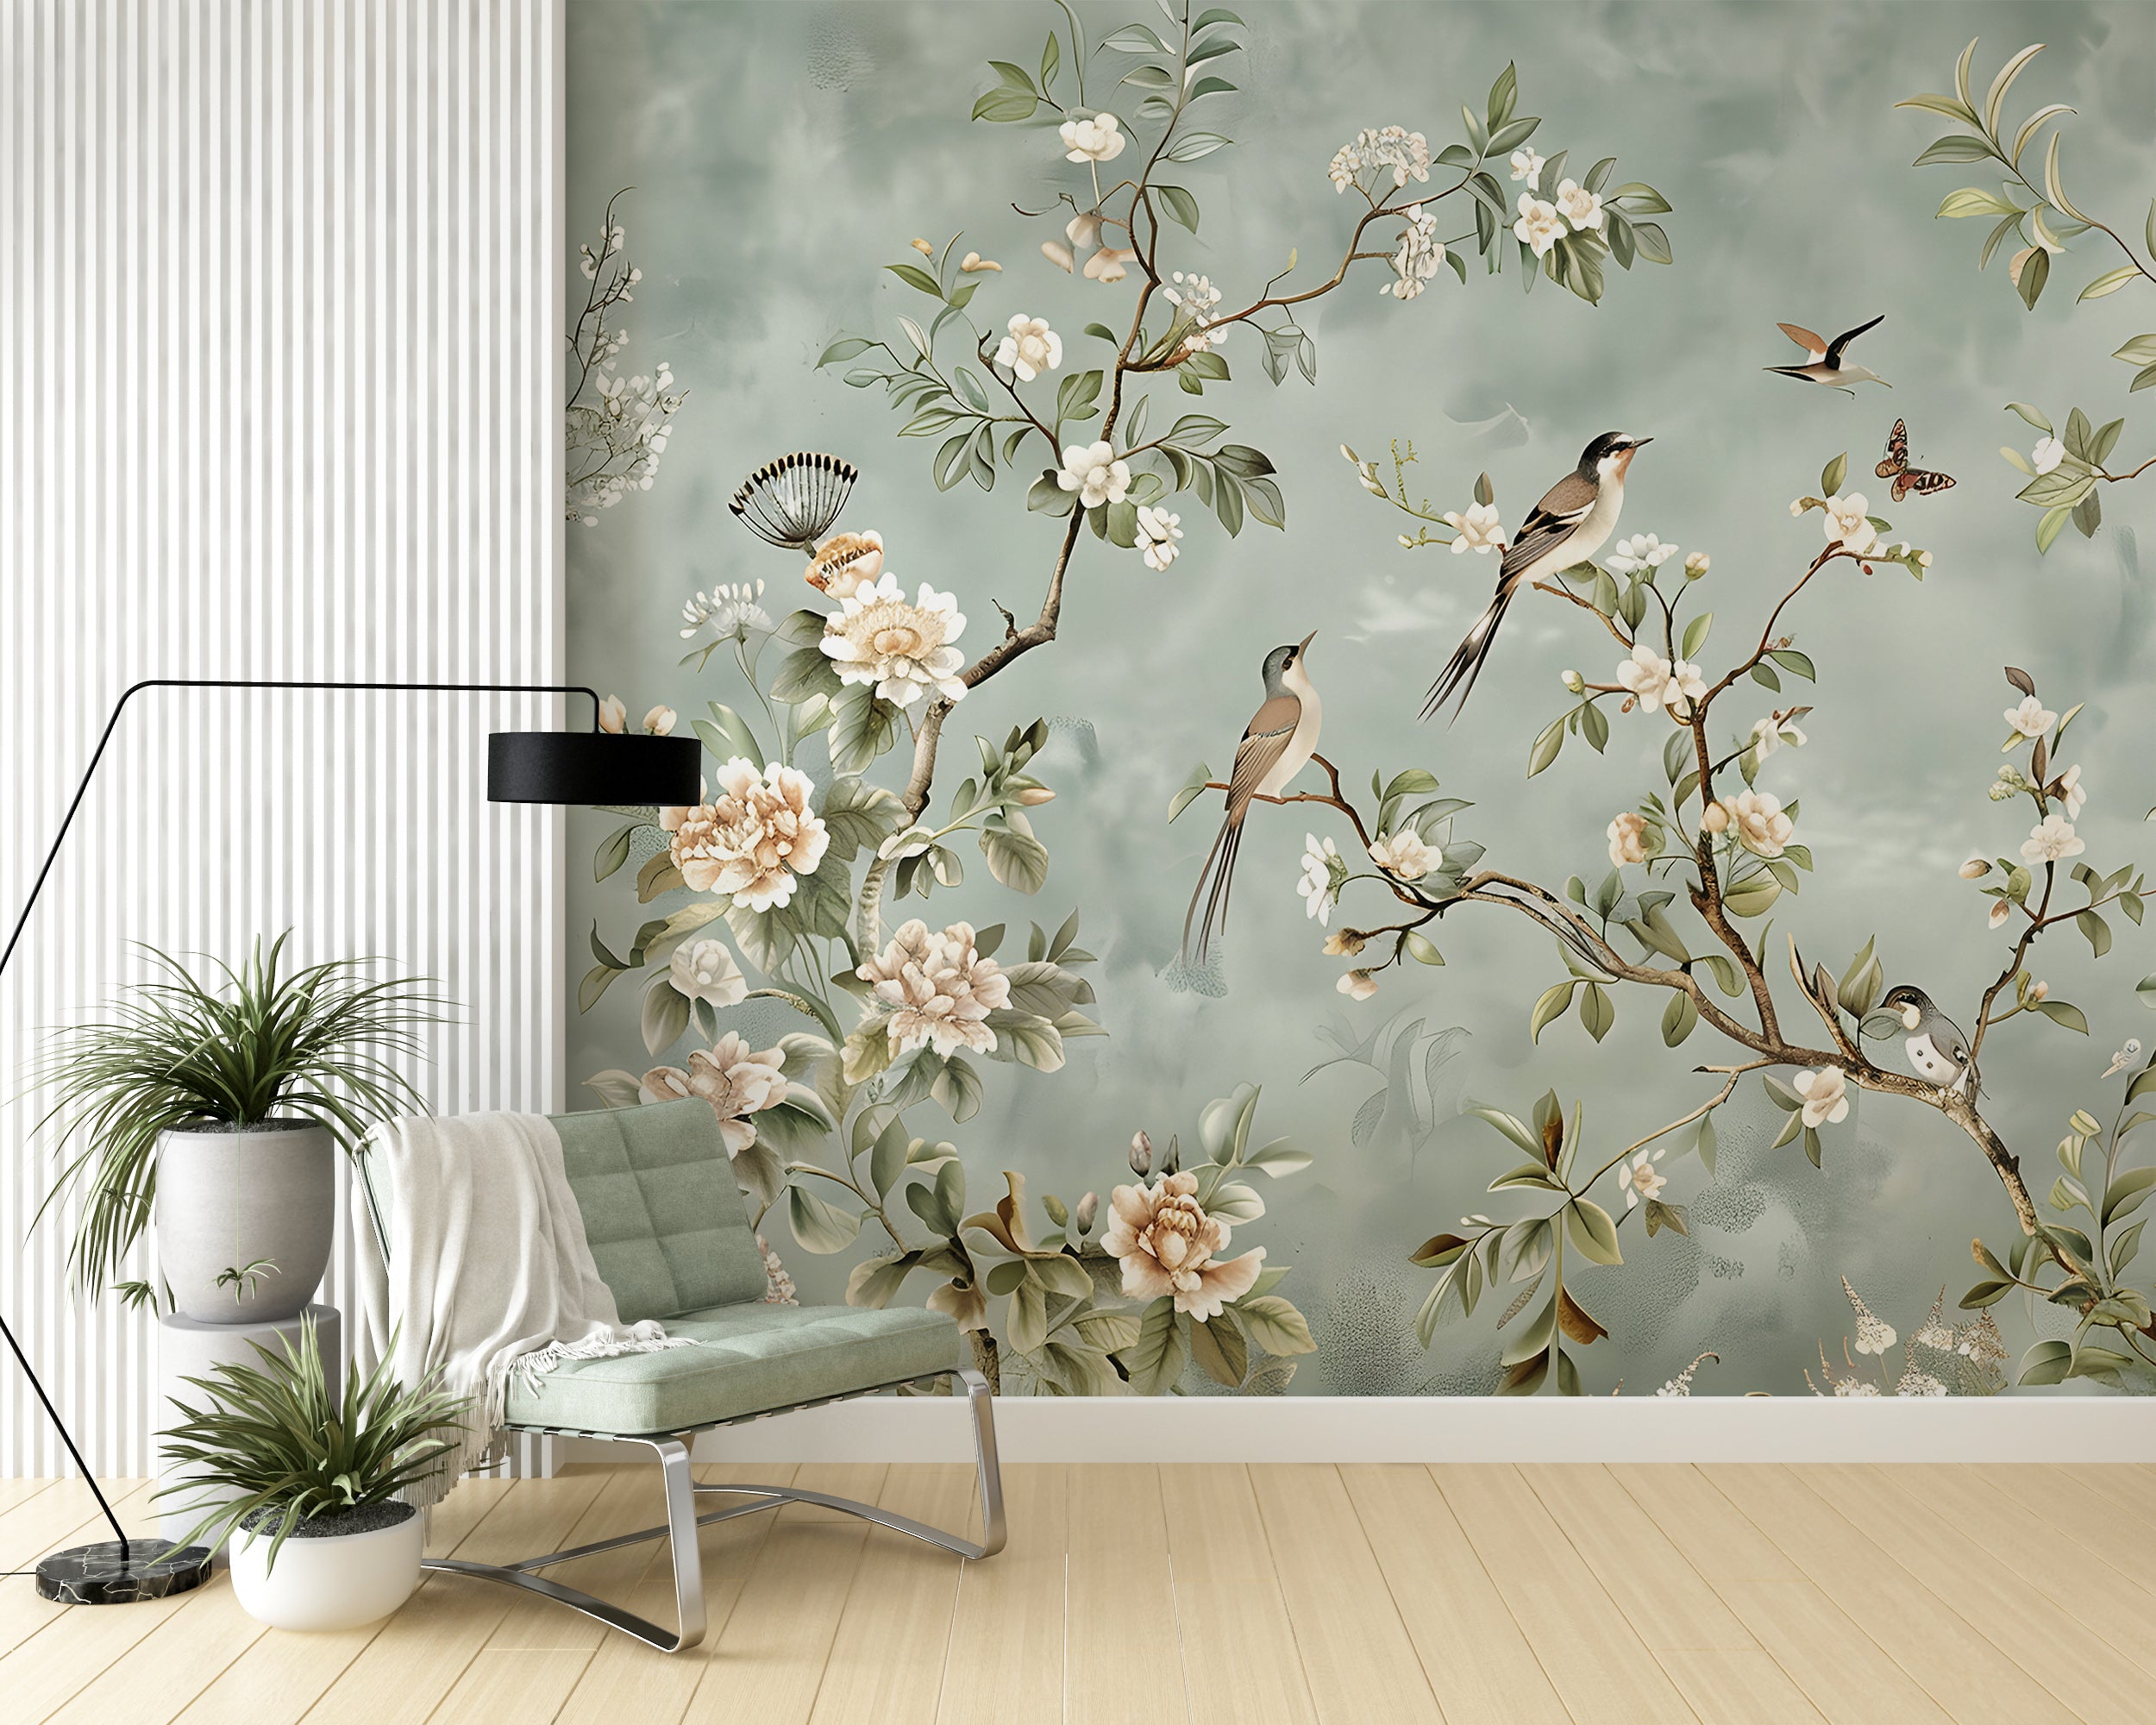 Chinoiserie wallpaper mural Peel and stick green floral wallpaper